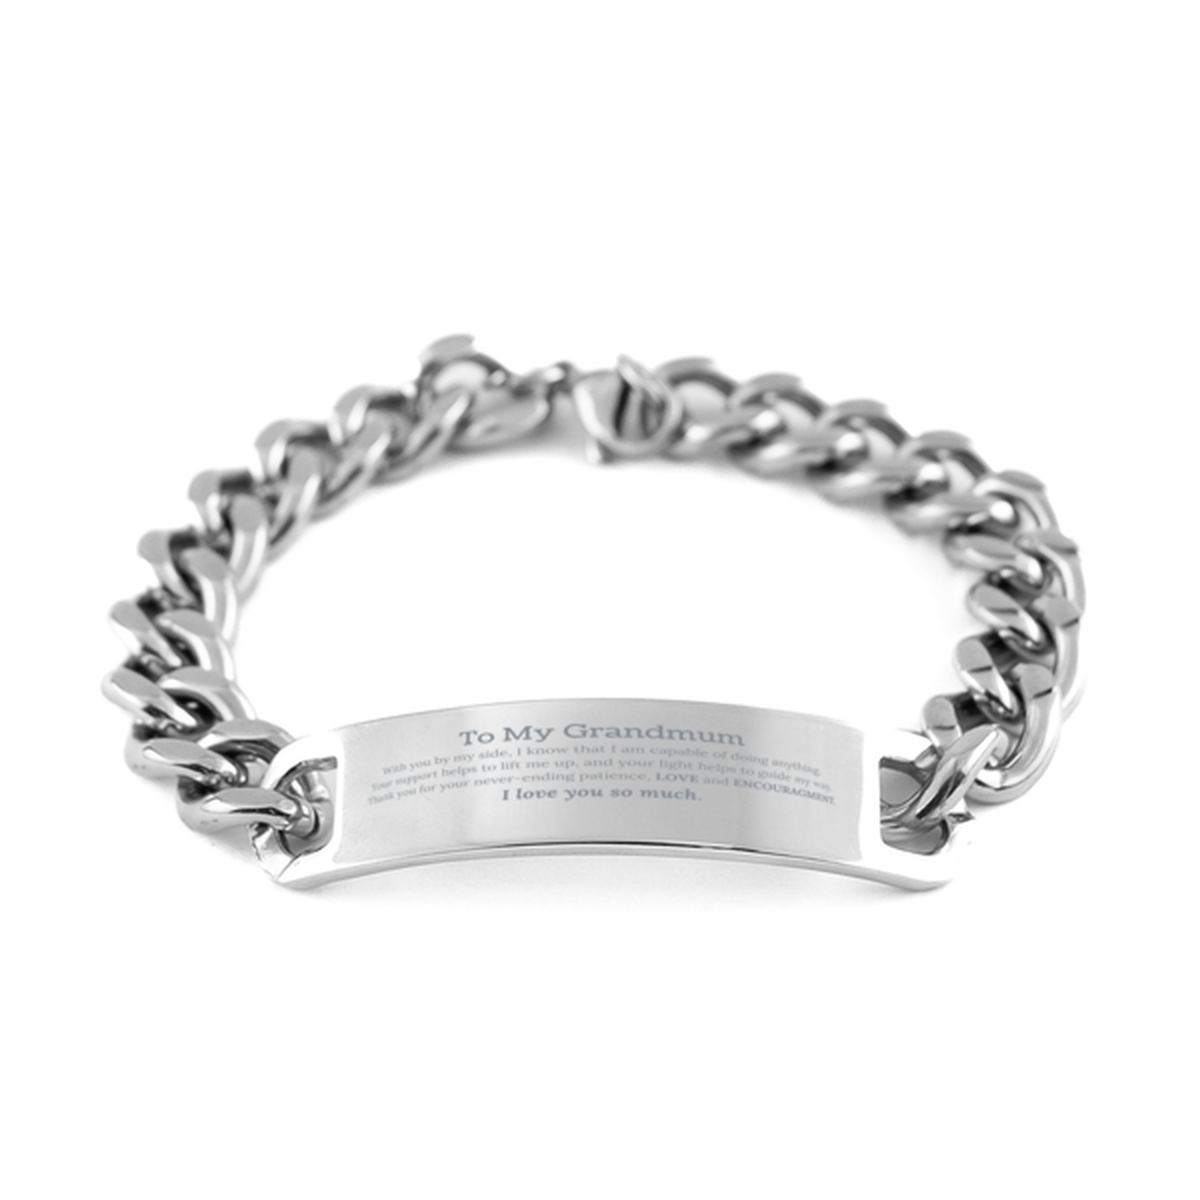 Appreciation Grandmum Cuban Chain Stainless Steel Bracelet Gifts, To My Grandmum Birthday Christmas Wedding Keepsake Gifts for Grandmum With you by my side, I know that I am capable of doing anything. I love you so much